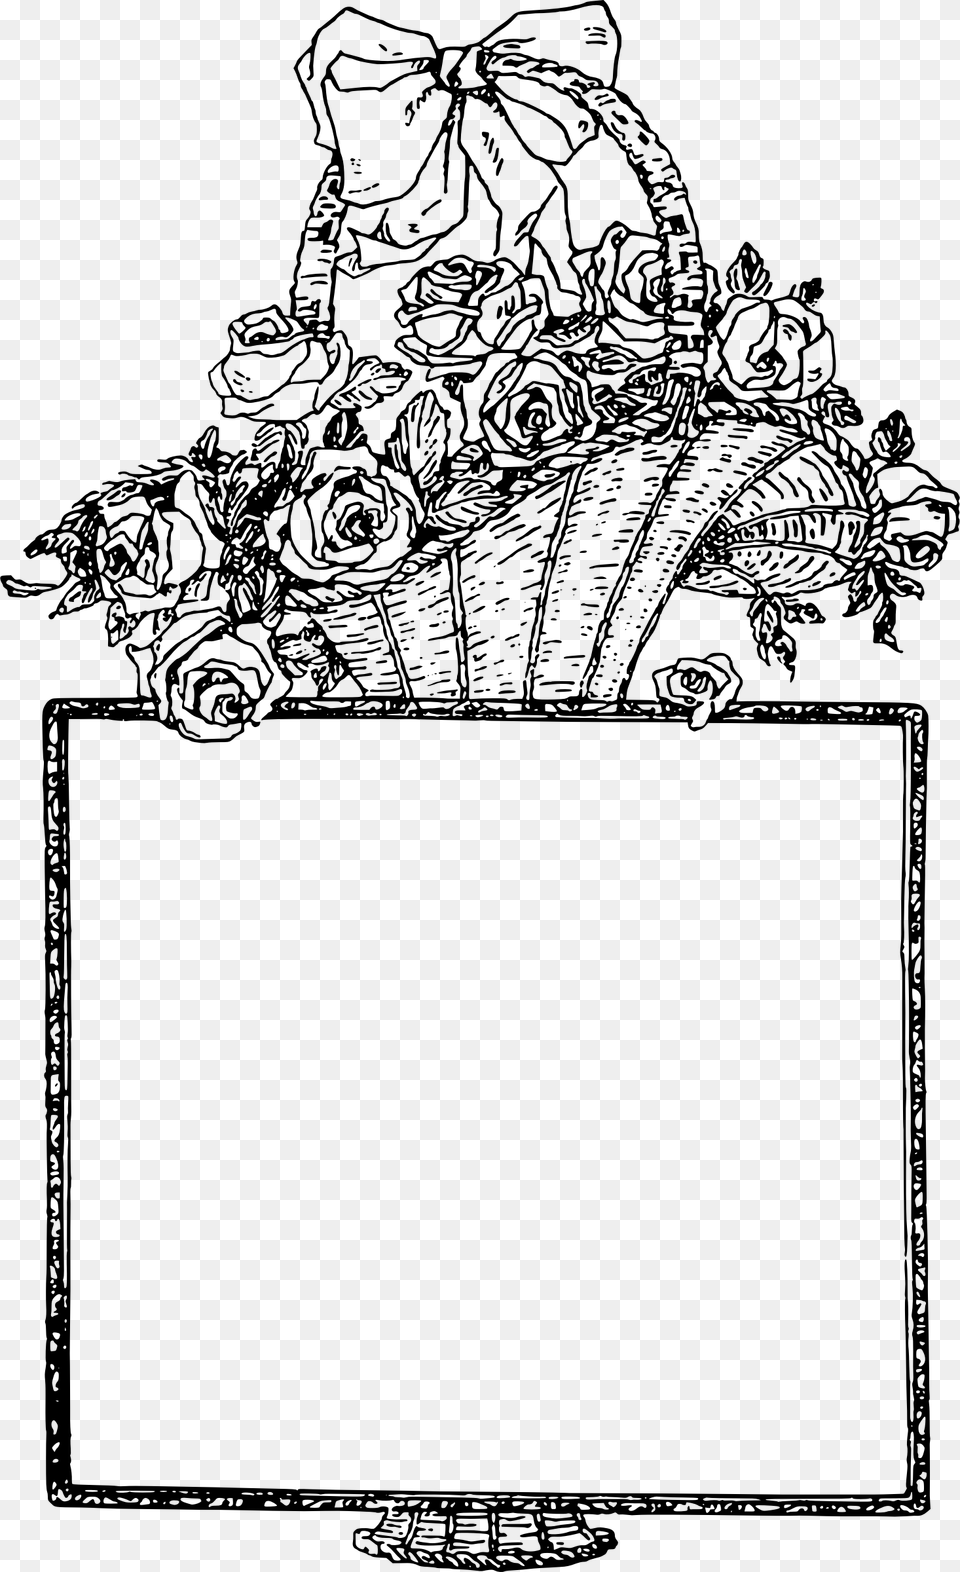 This Icons Design Of Flower Basket Frame, Gray Png Image